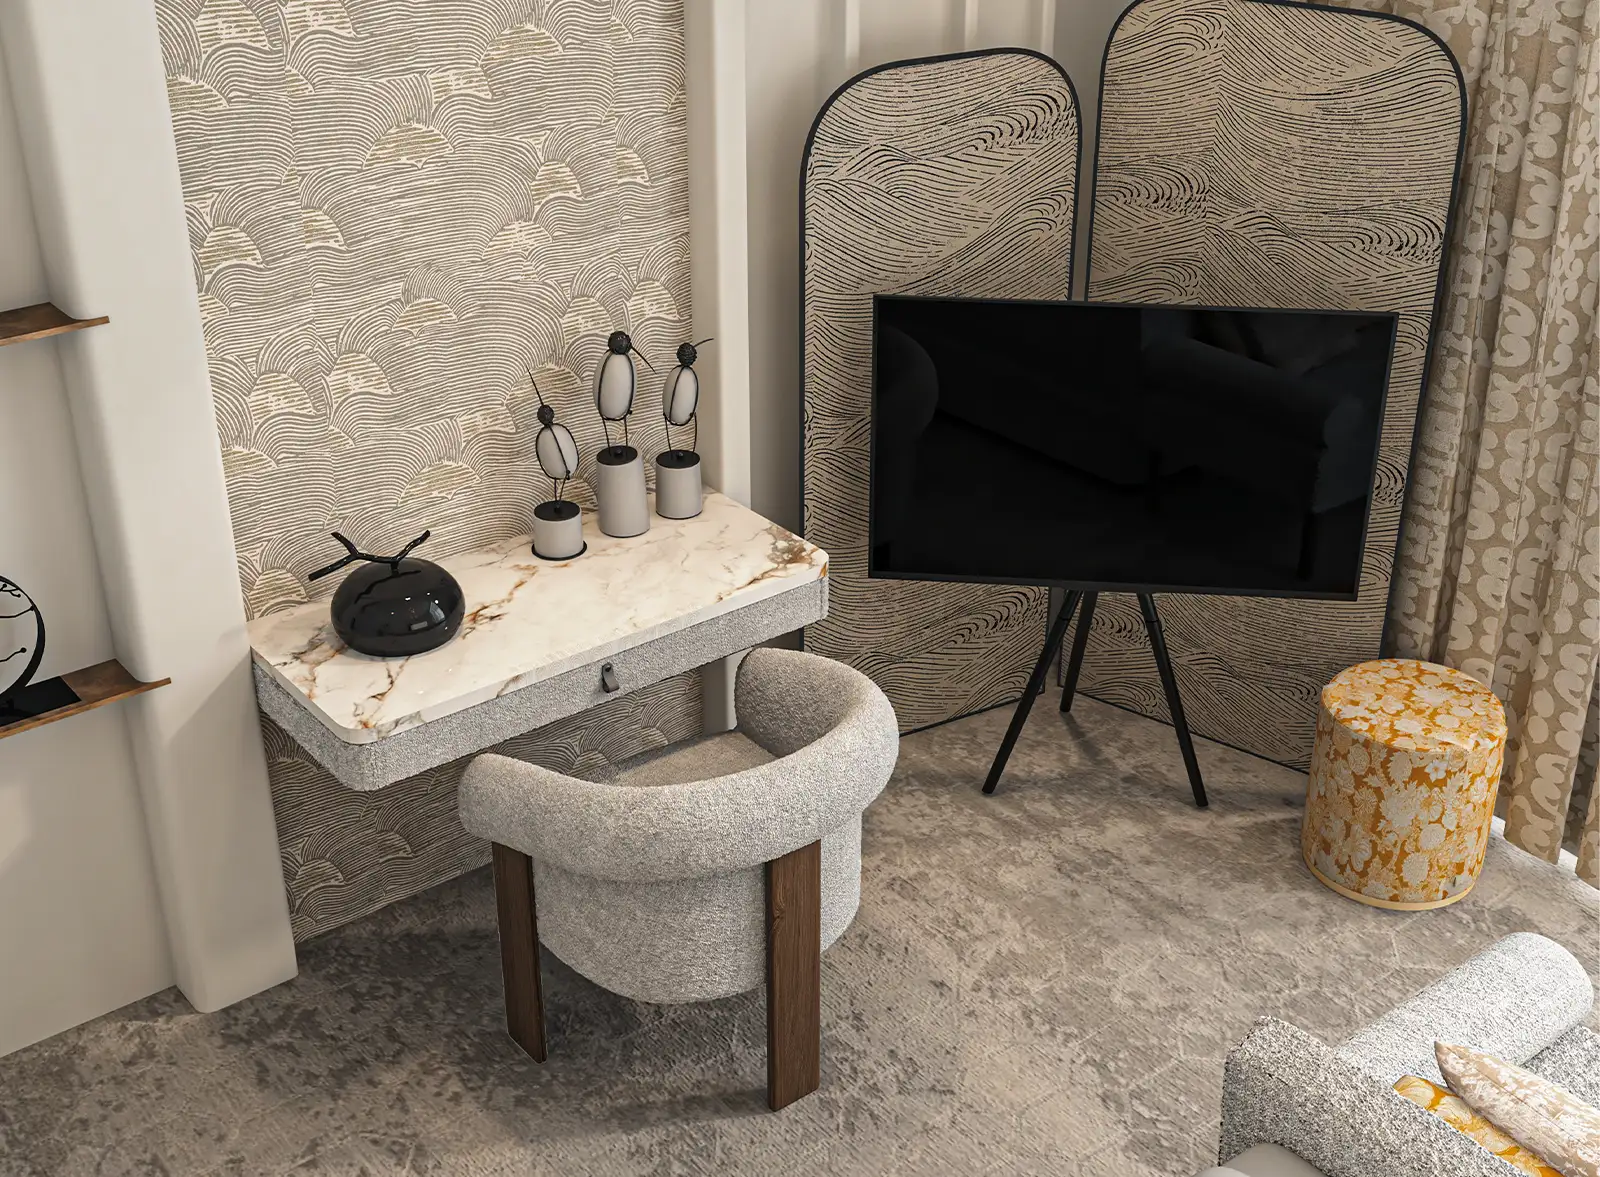 Chic interior design of a vanity area with a marble tabletop, elegant textured wallpaper, and a unique upholstered chair, complemented by decorative vases and a modern television set, blending functionality with sophisticated style.